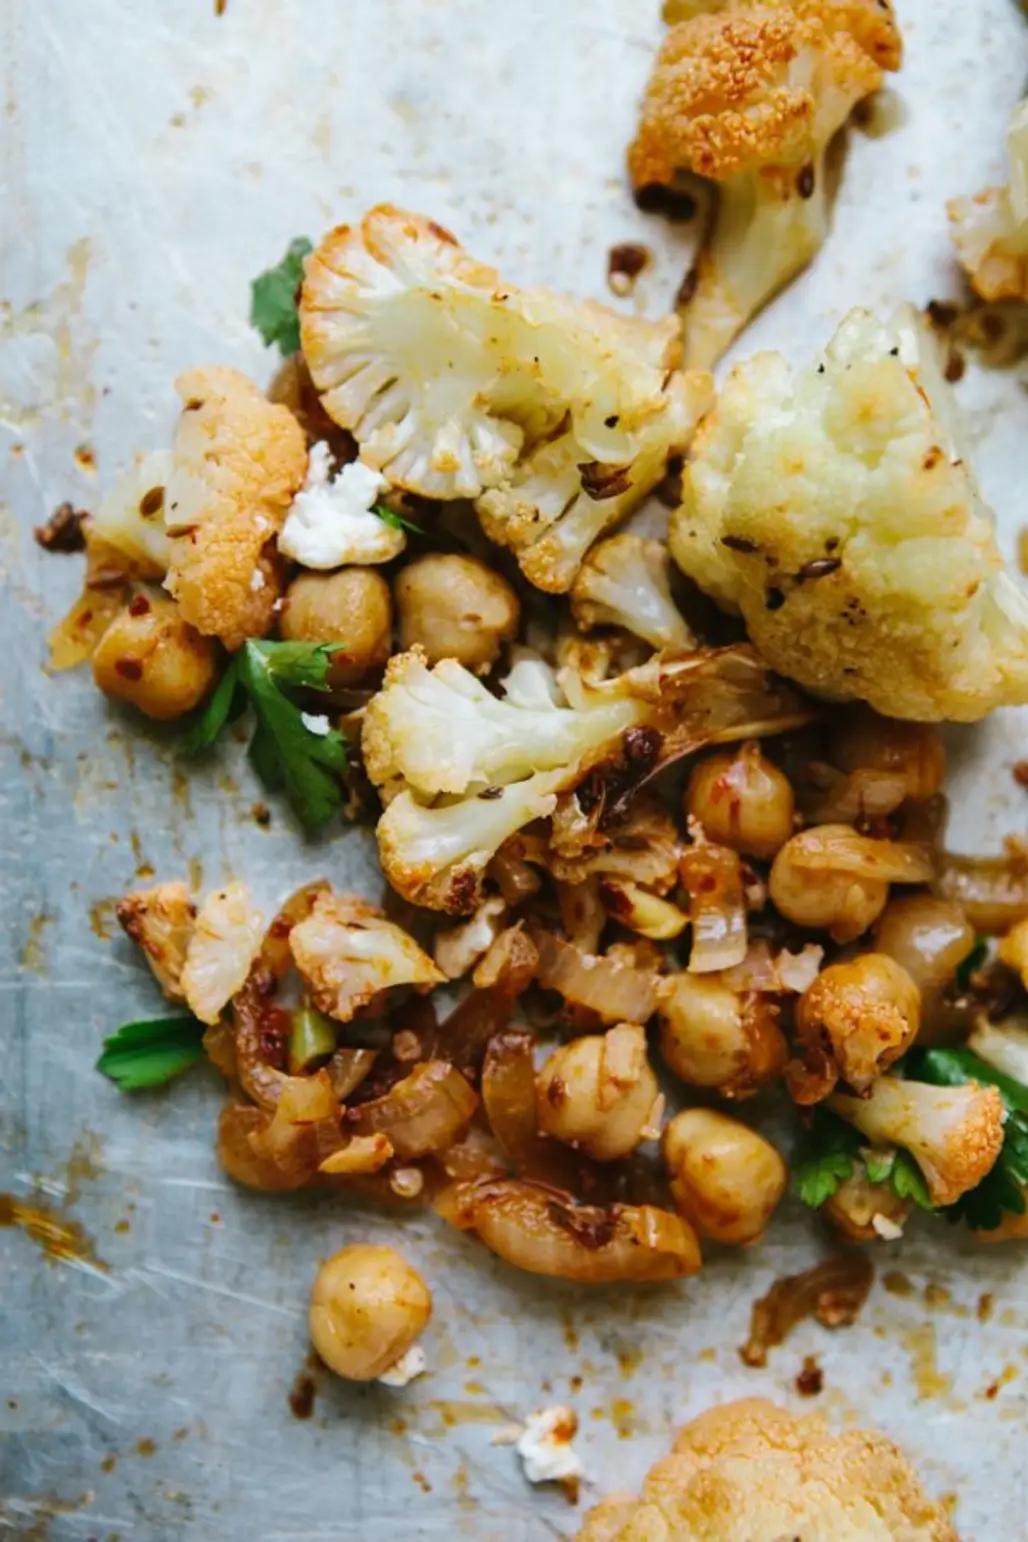 Roast Cauliflower with Tony Chachere’s Sprinkled on Top